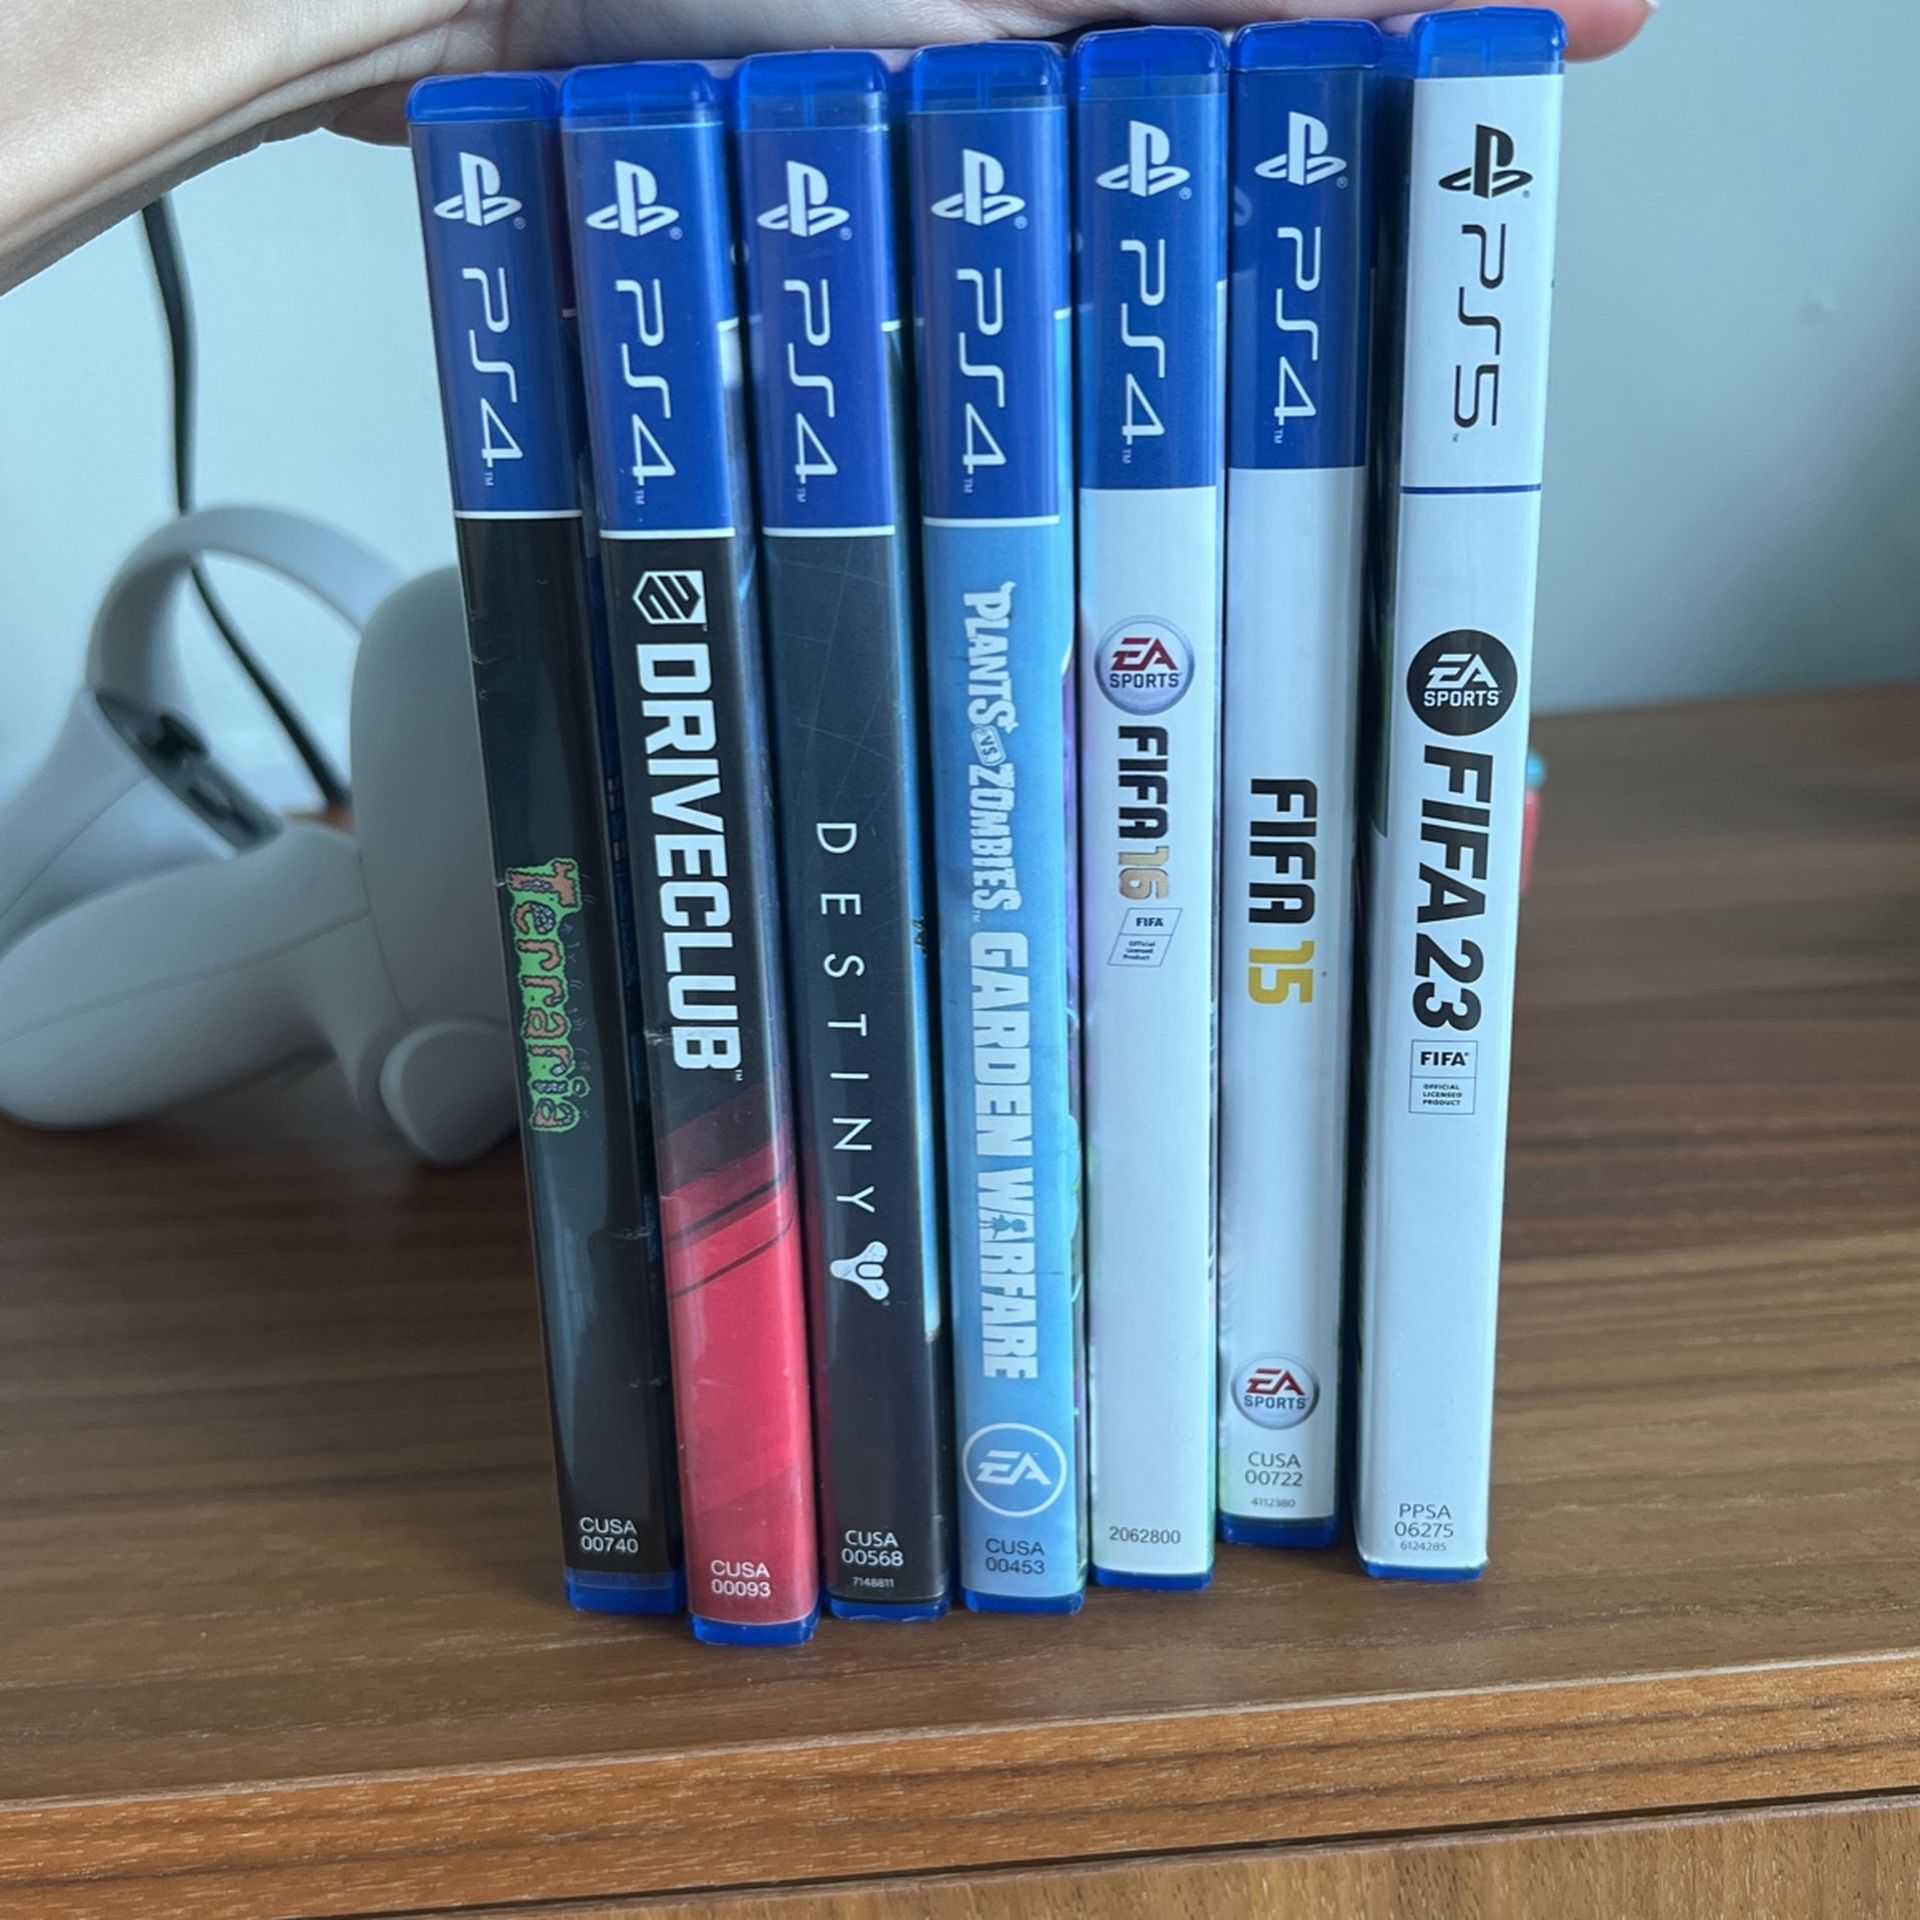 Games for PS4 &PS5